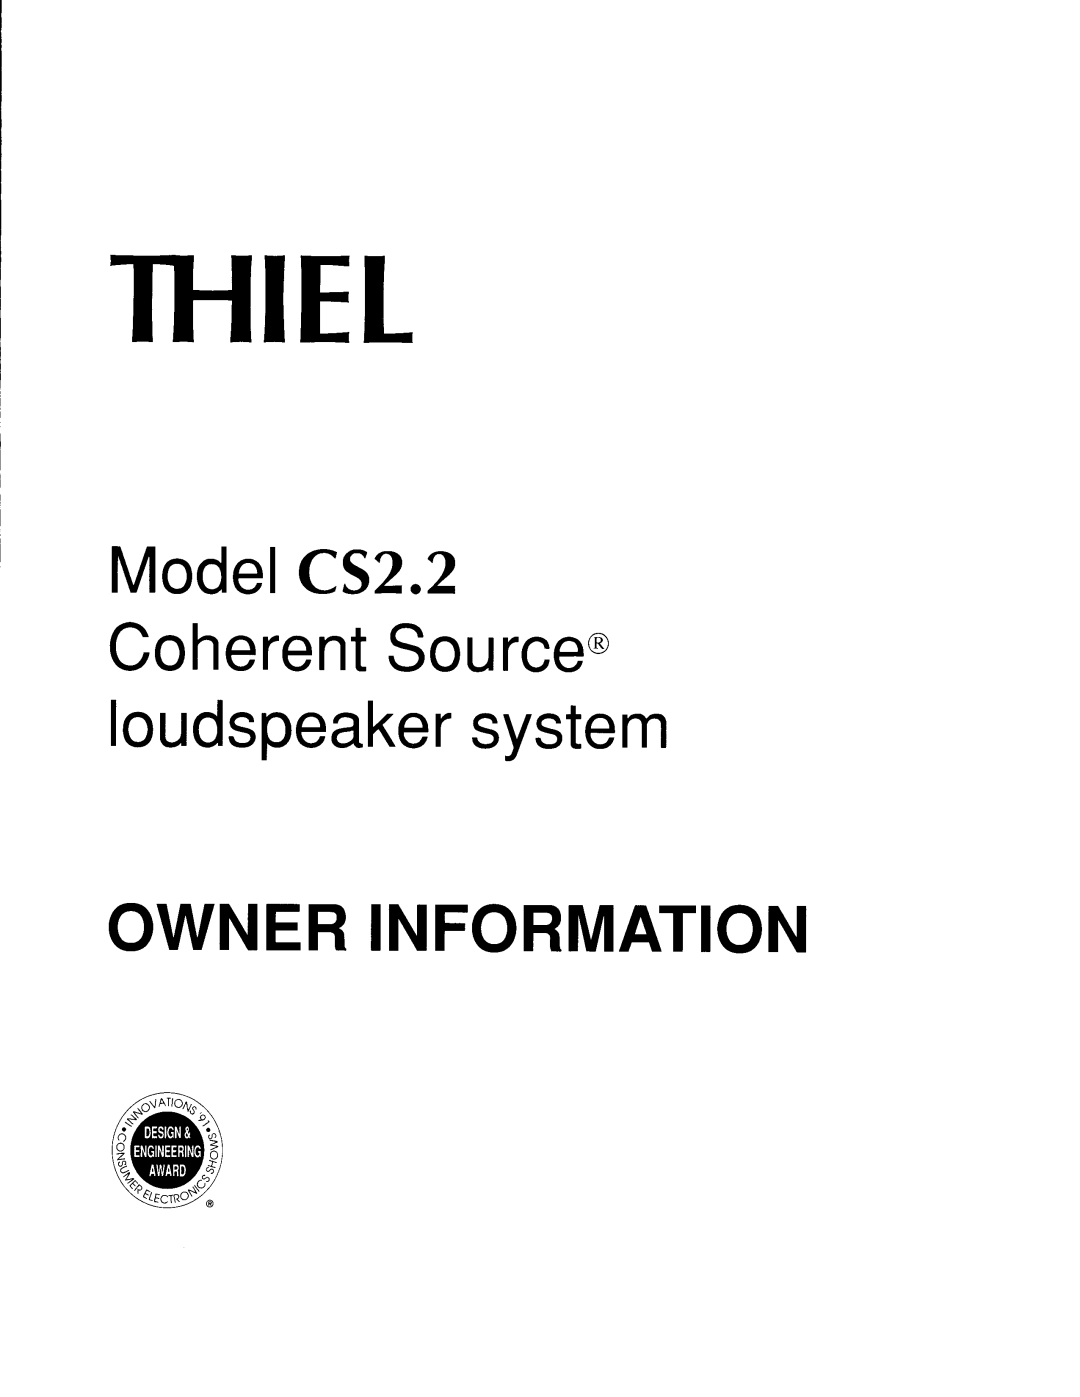 Thiel Audio Products manual Thiel, ModelCS2.2 CoherentSource@ loudspeakersystem, Ownerinformation 